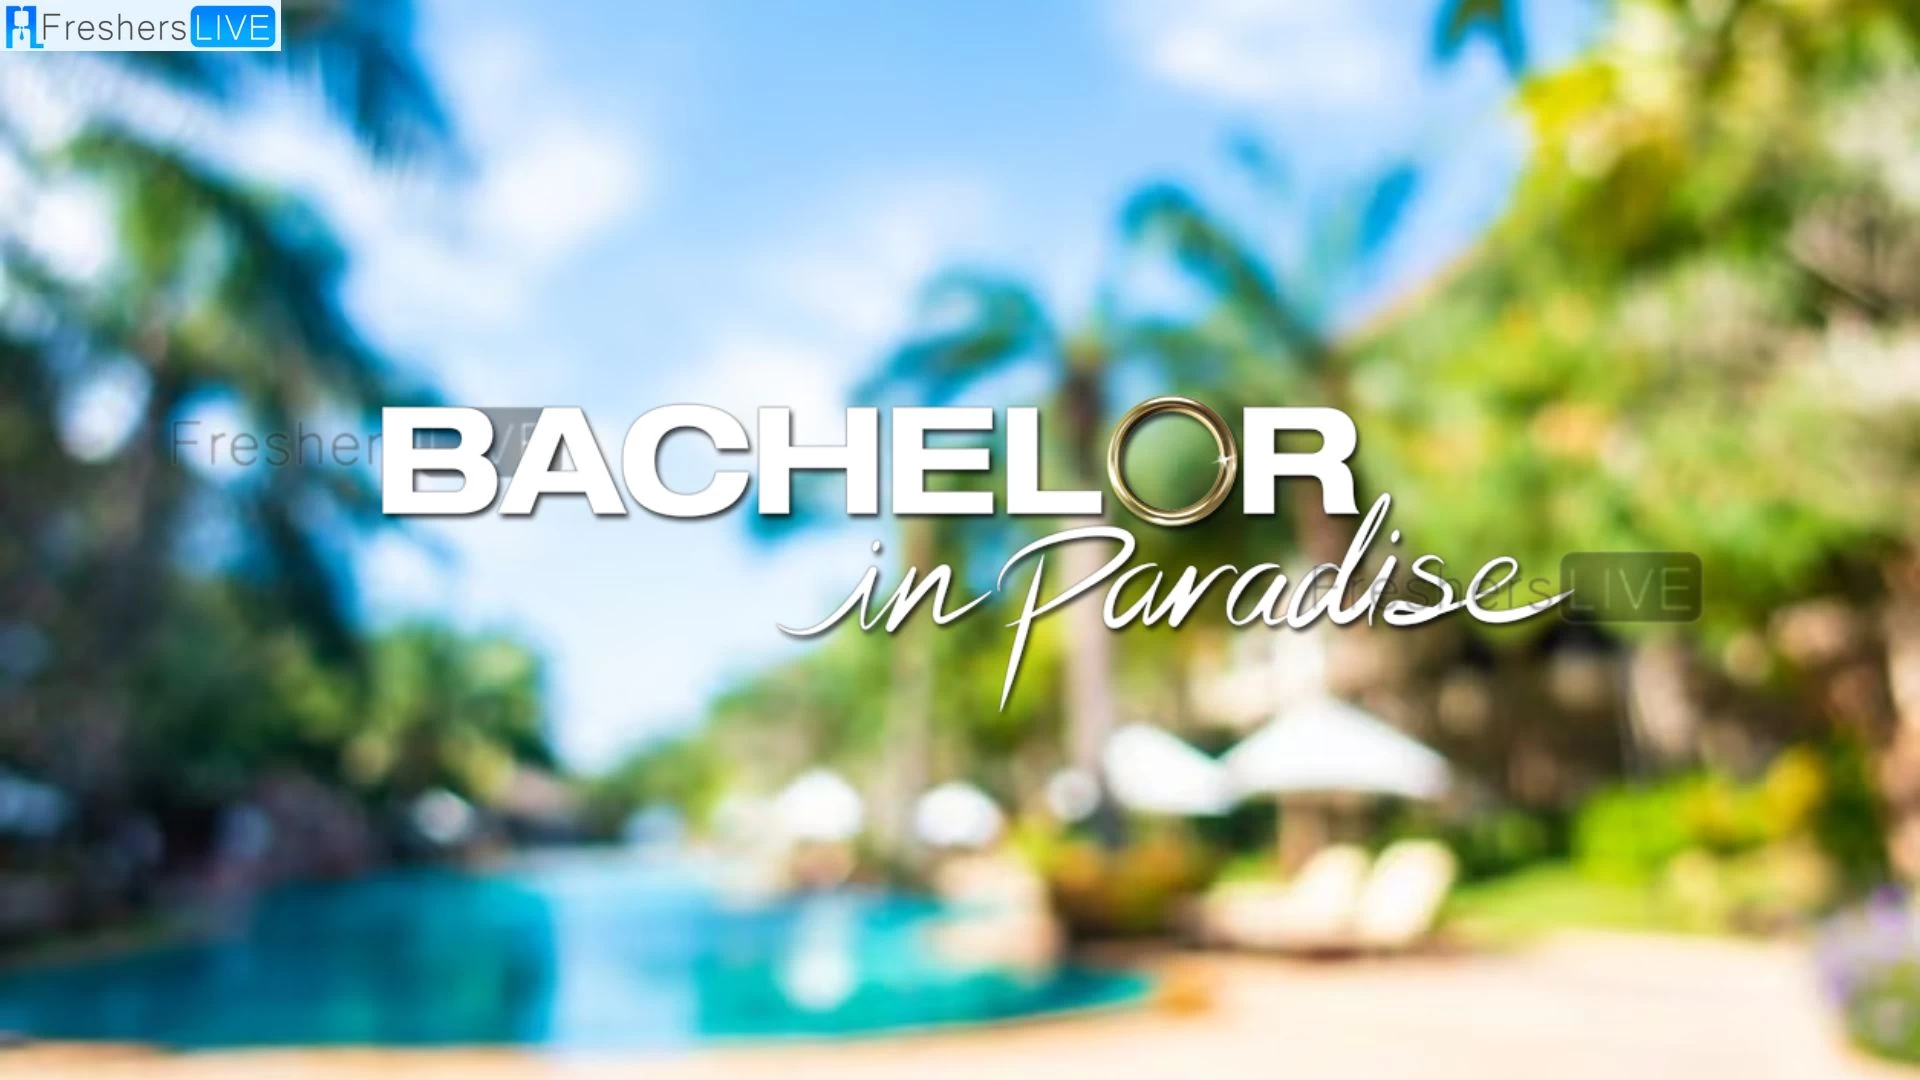 Is Bachelor in Paradise on Tonight? When is Bachelor in Paradise Available on Hulu? How to Watch Bachelor in Paradise? Bachelor in Paradise Hulu Release Time